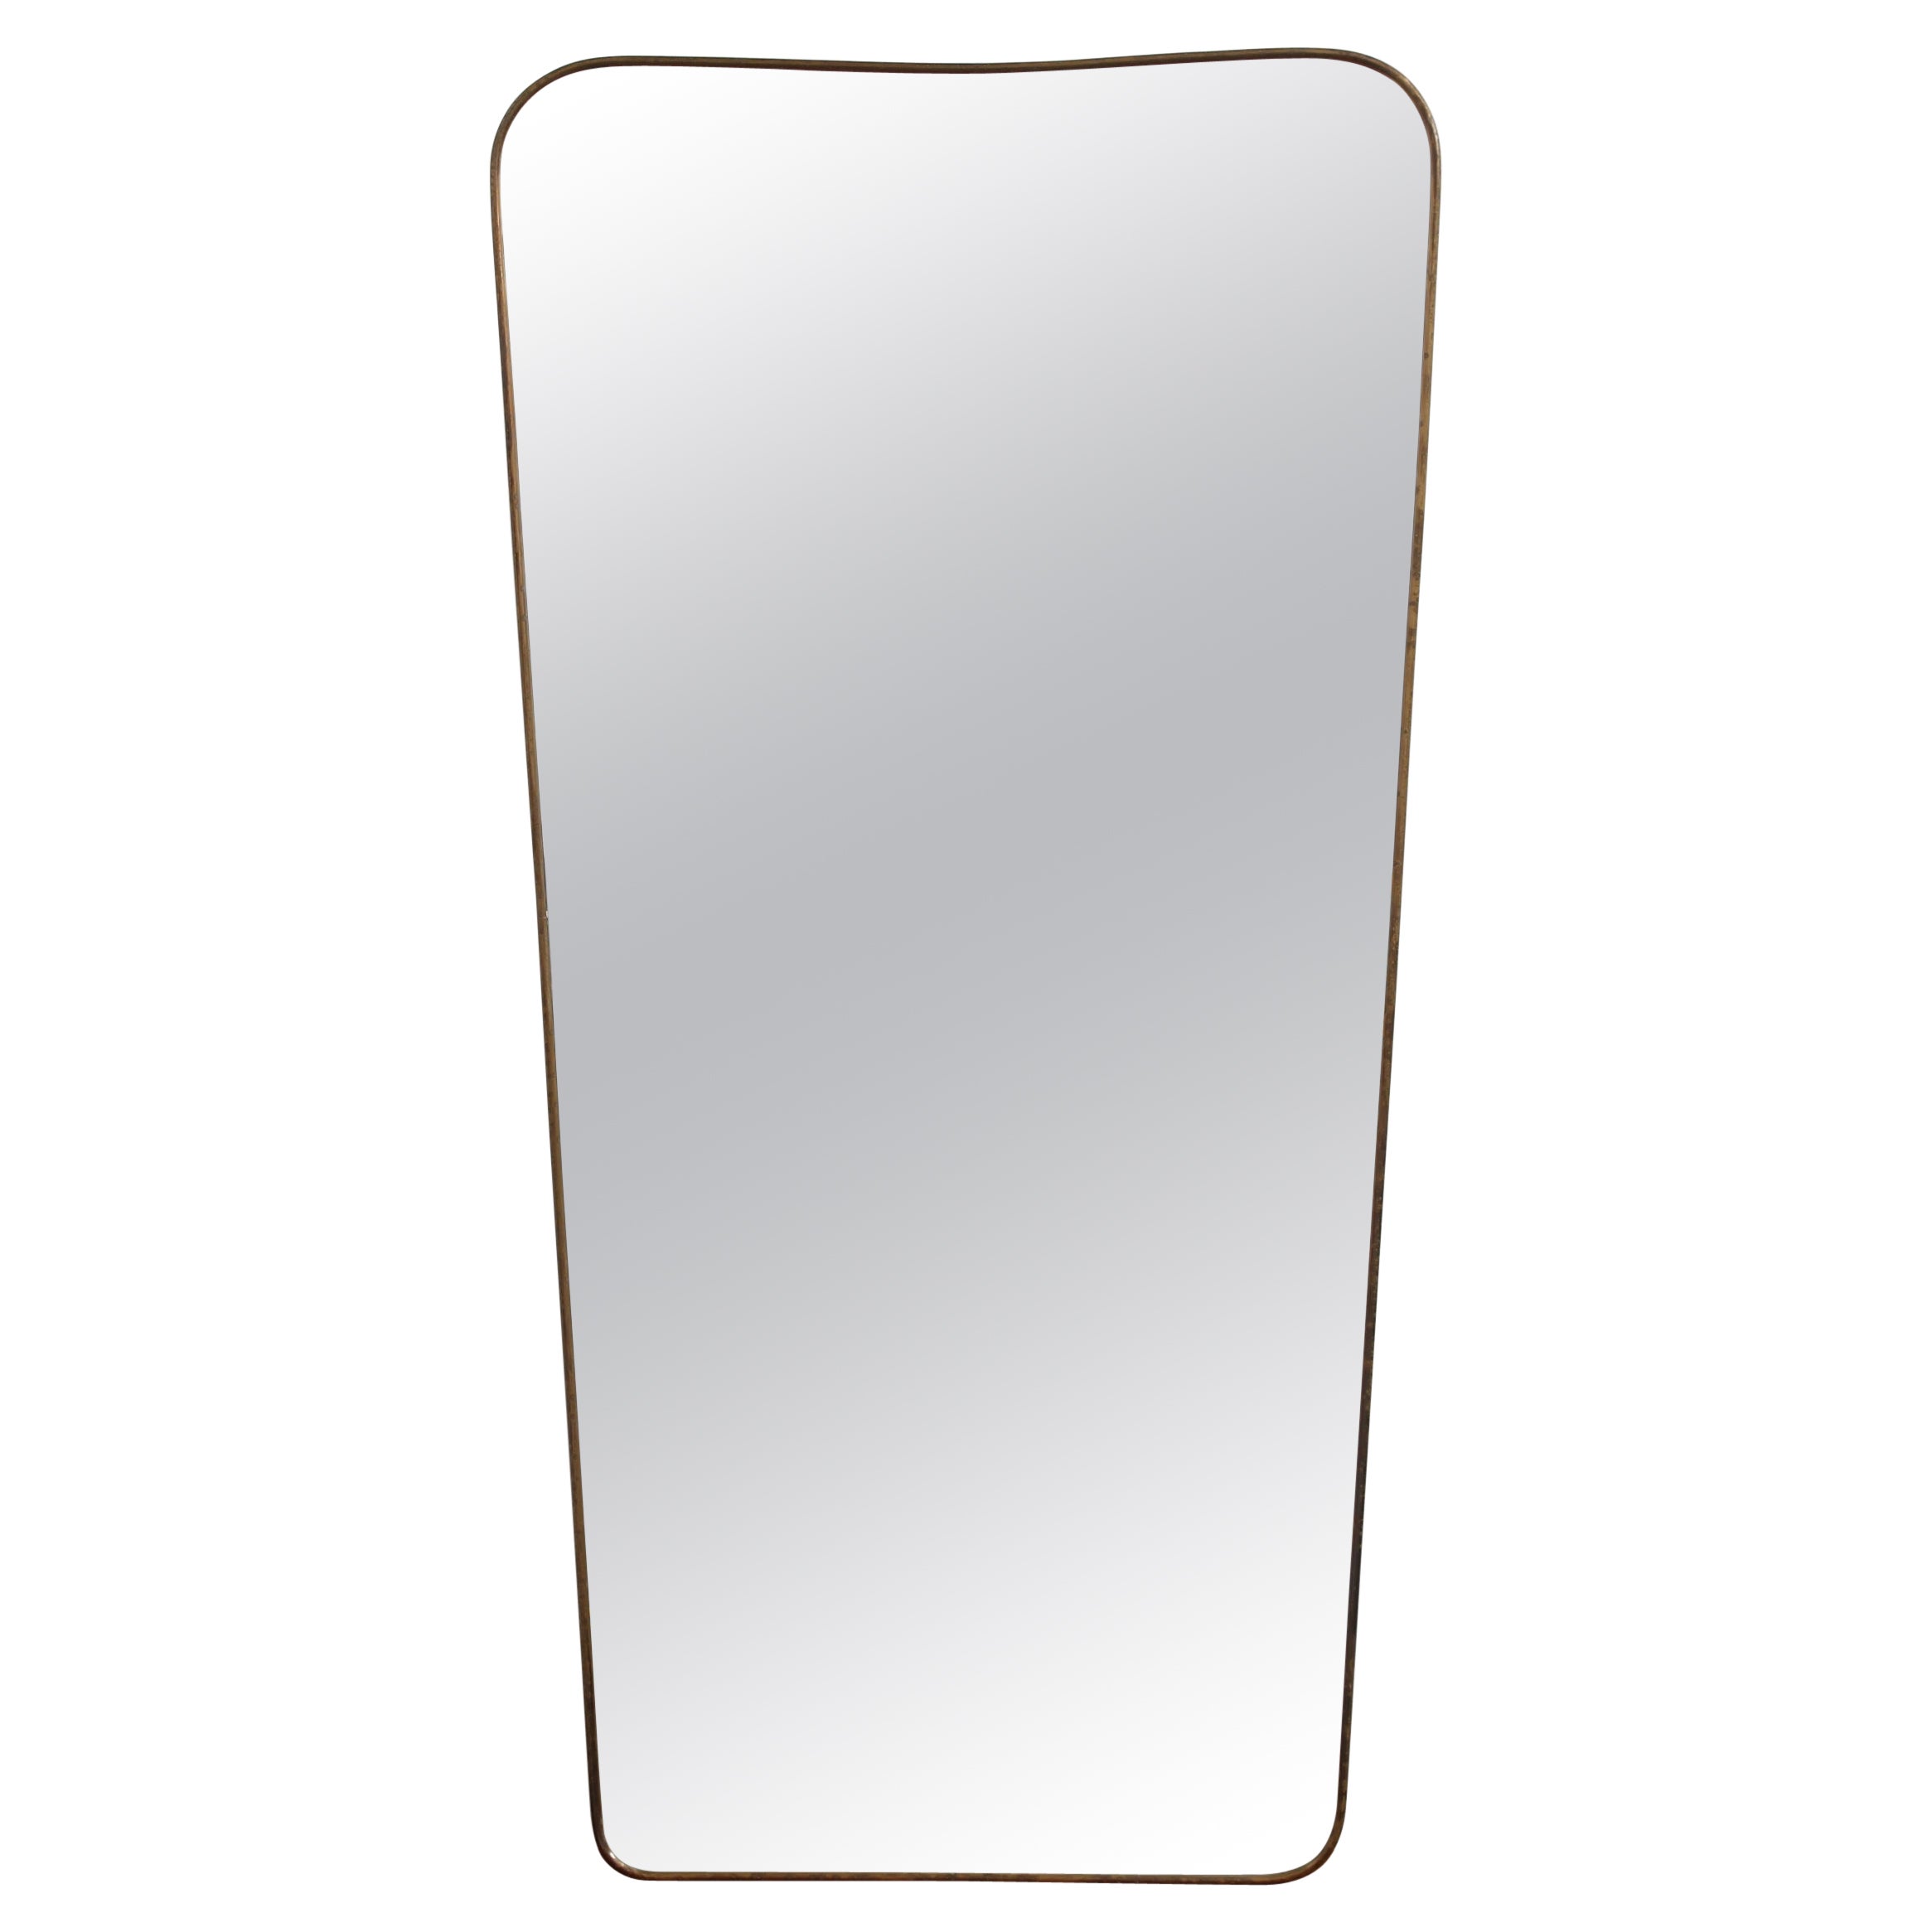 Vintage Italian Wall Mirror with Brass Frame (circa 1950s) - Large For Sale